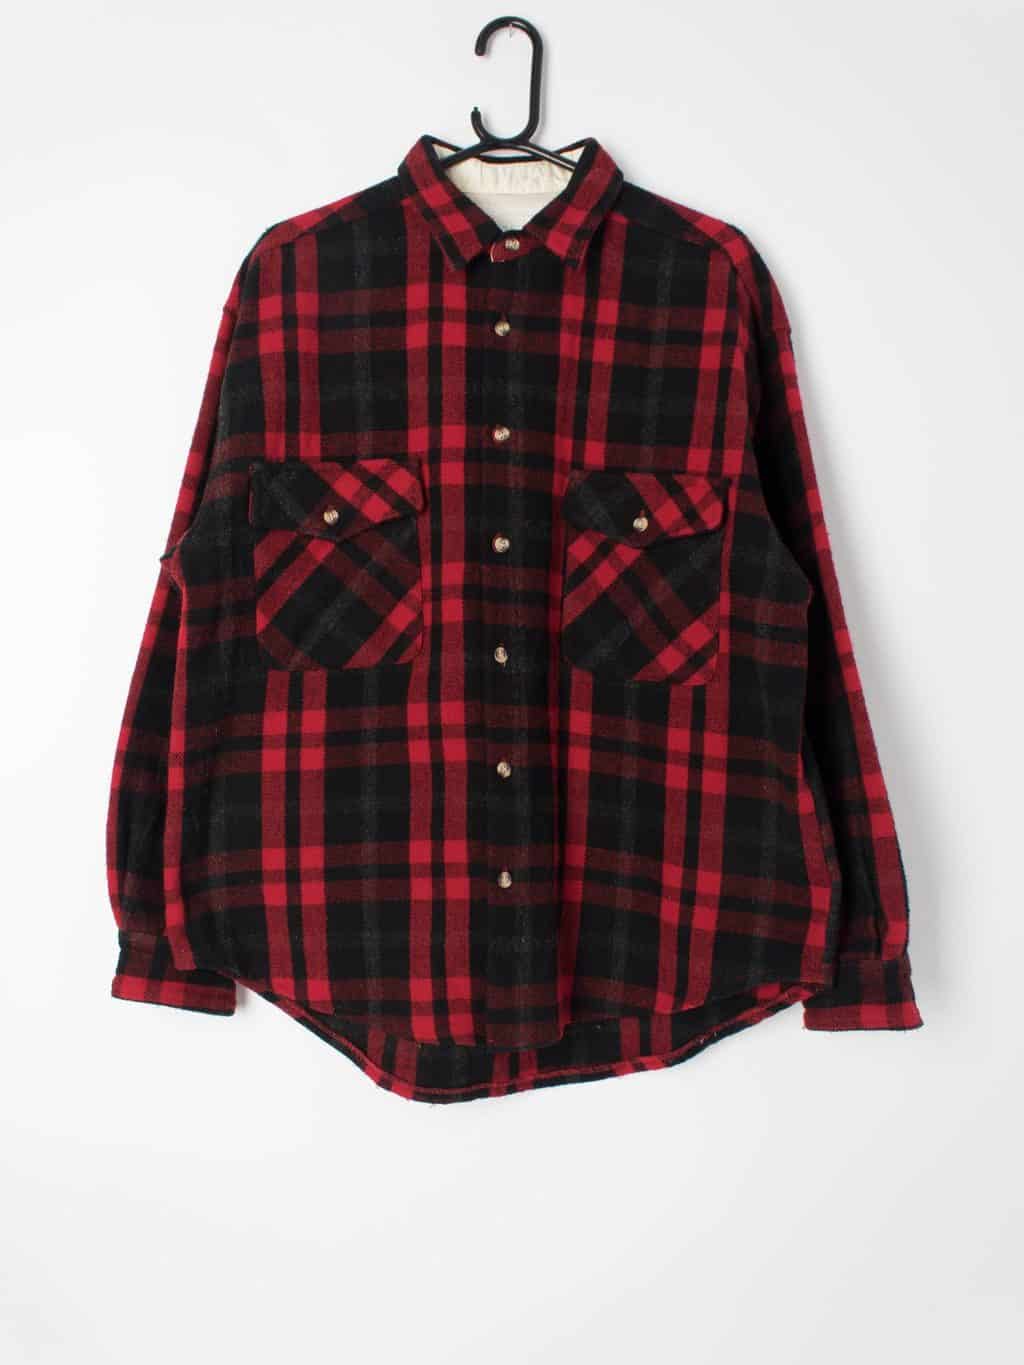 https://www.stcyrvintage.co.uk/wp-content/uploads/2022/02/mens-vintage-thick-plaid-shirt-heavy-weight-red-and-black-flannel-with-lined-neck-and-collar-medium-large-6218c86e-scaled.jpg